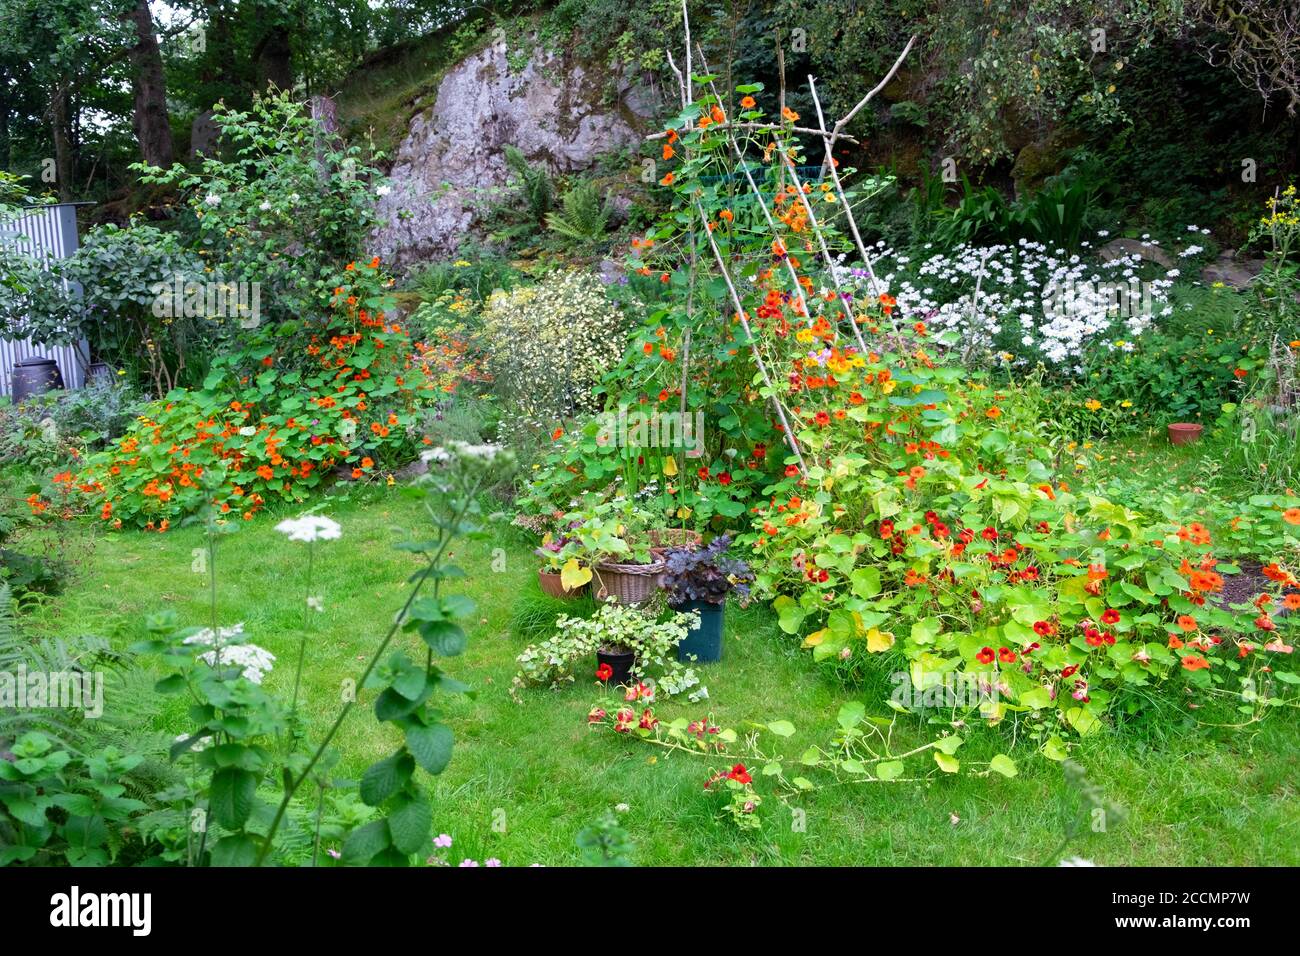 Climbing nasturtiums on a wooden support made of sticks branches in a small backyard garden in August Carmarthenshire Wales UK  KATHY DEWITT Stock Photo